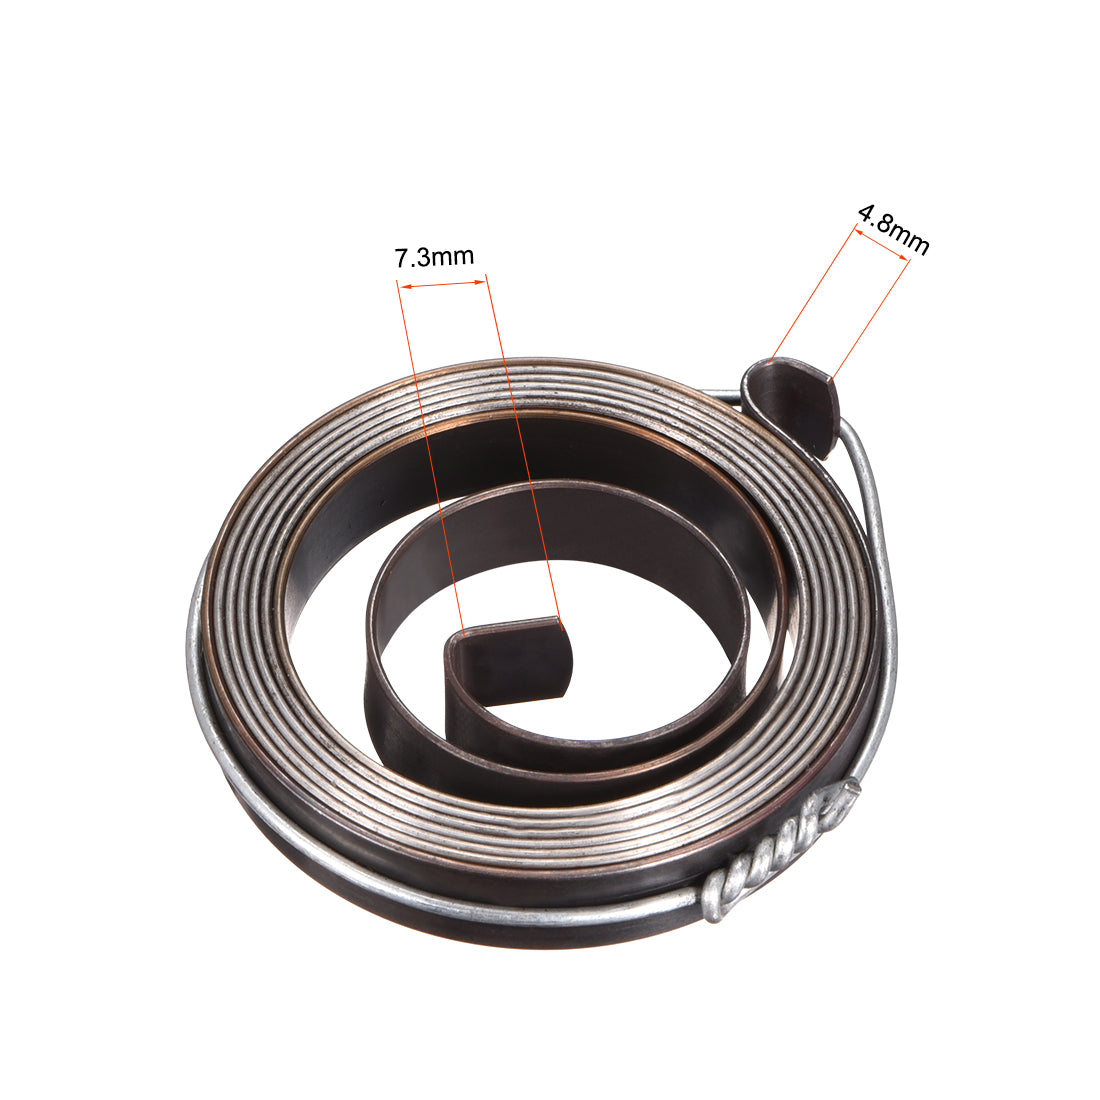 uxcell Uxcell Drill Press Spring Quill Feed Return Coil Spring Blackening 1000mm 40x8x0.8mm 2pcs